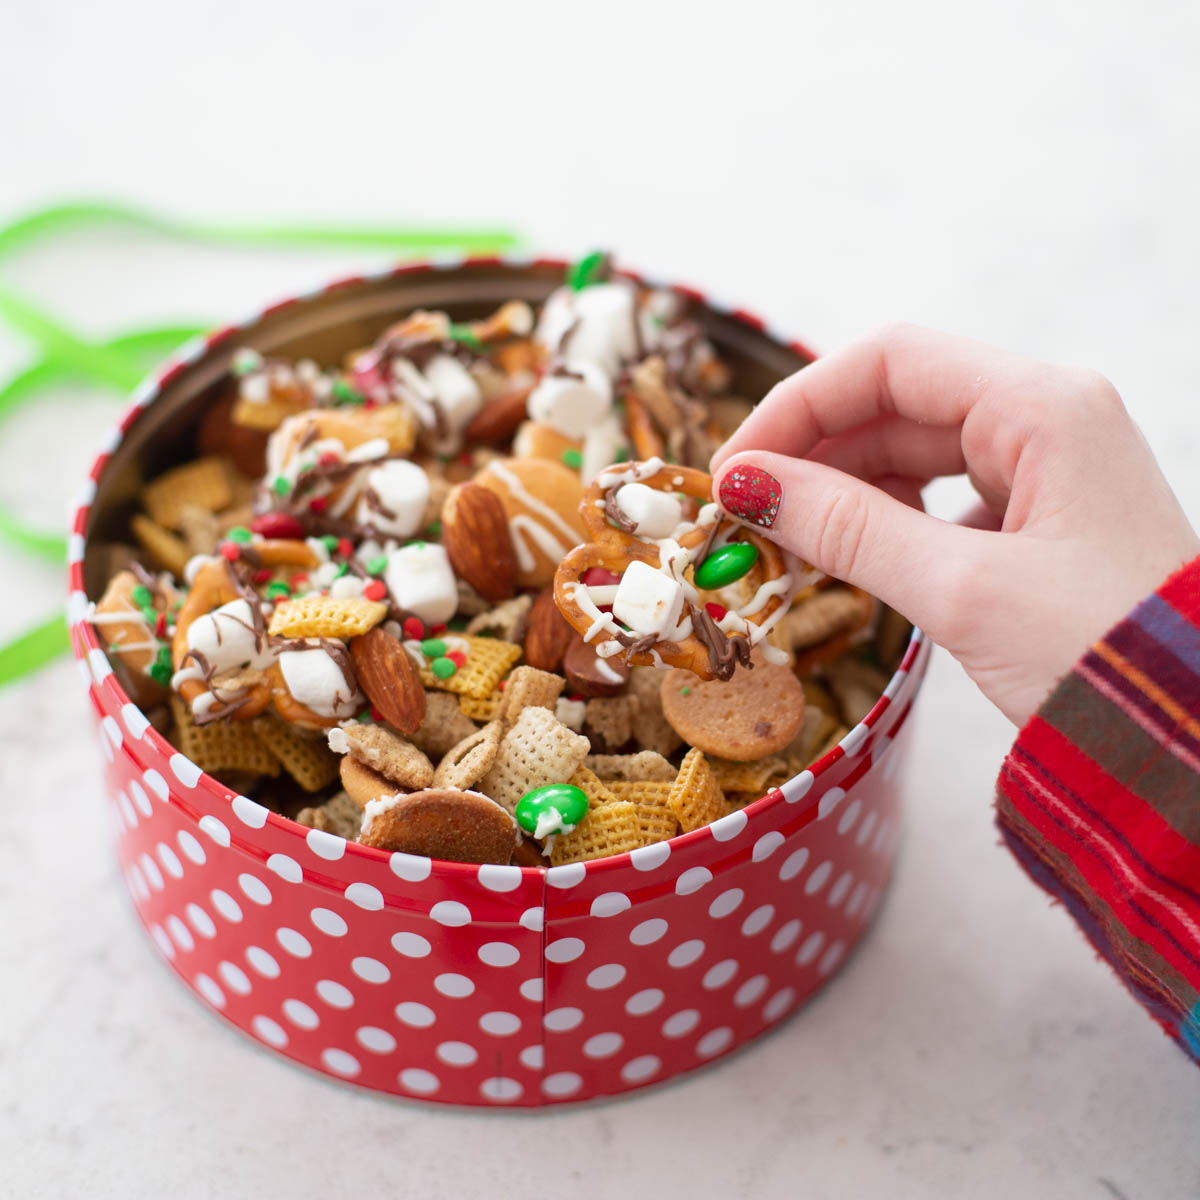 A young girl in Christmas pajamas reaches for a bite of the Christmas chex mix in a red serving container.